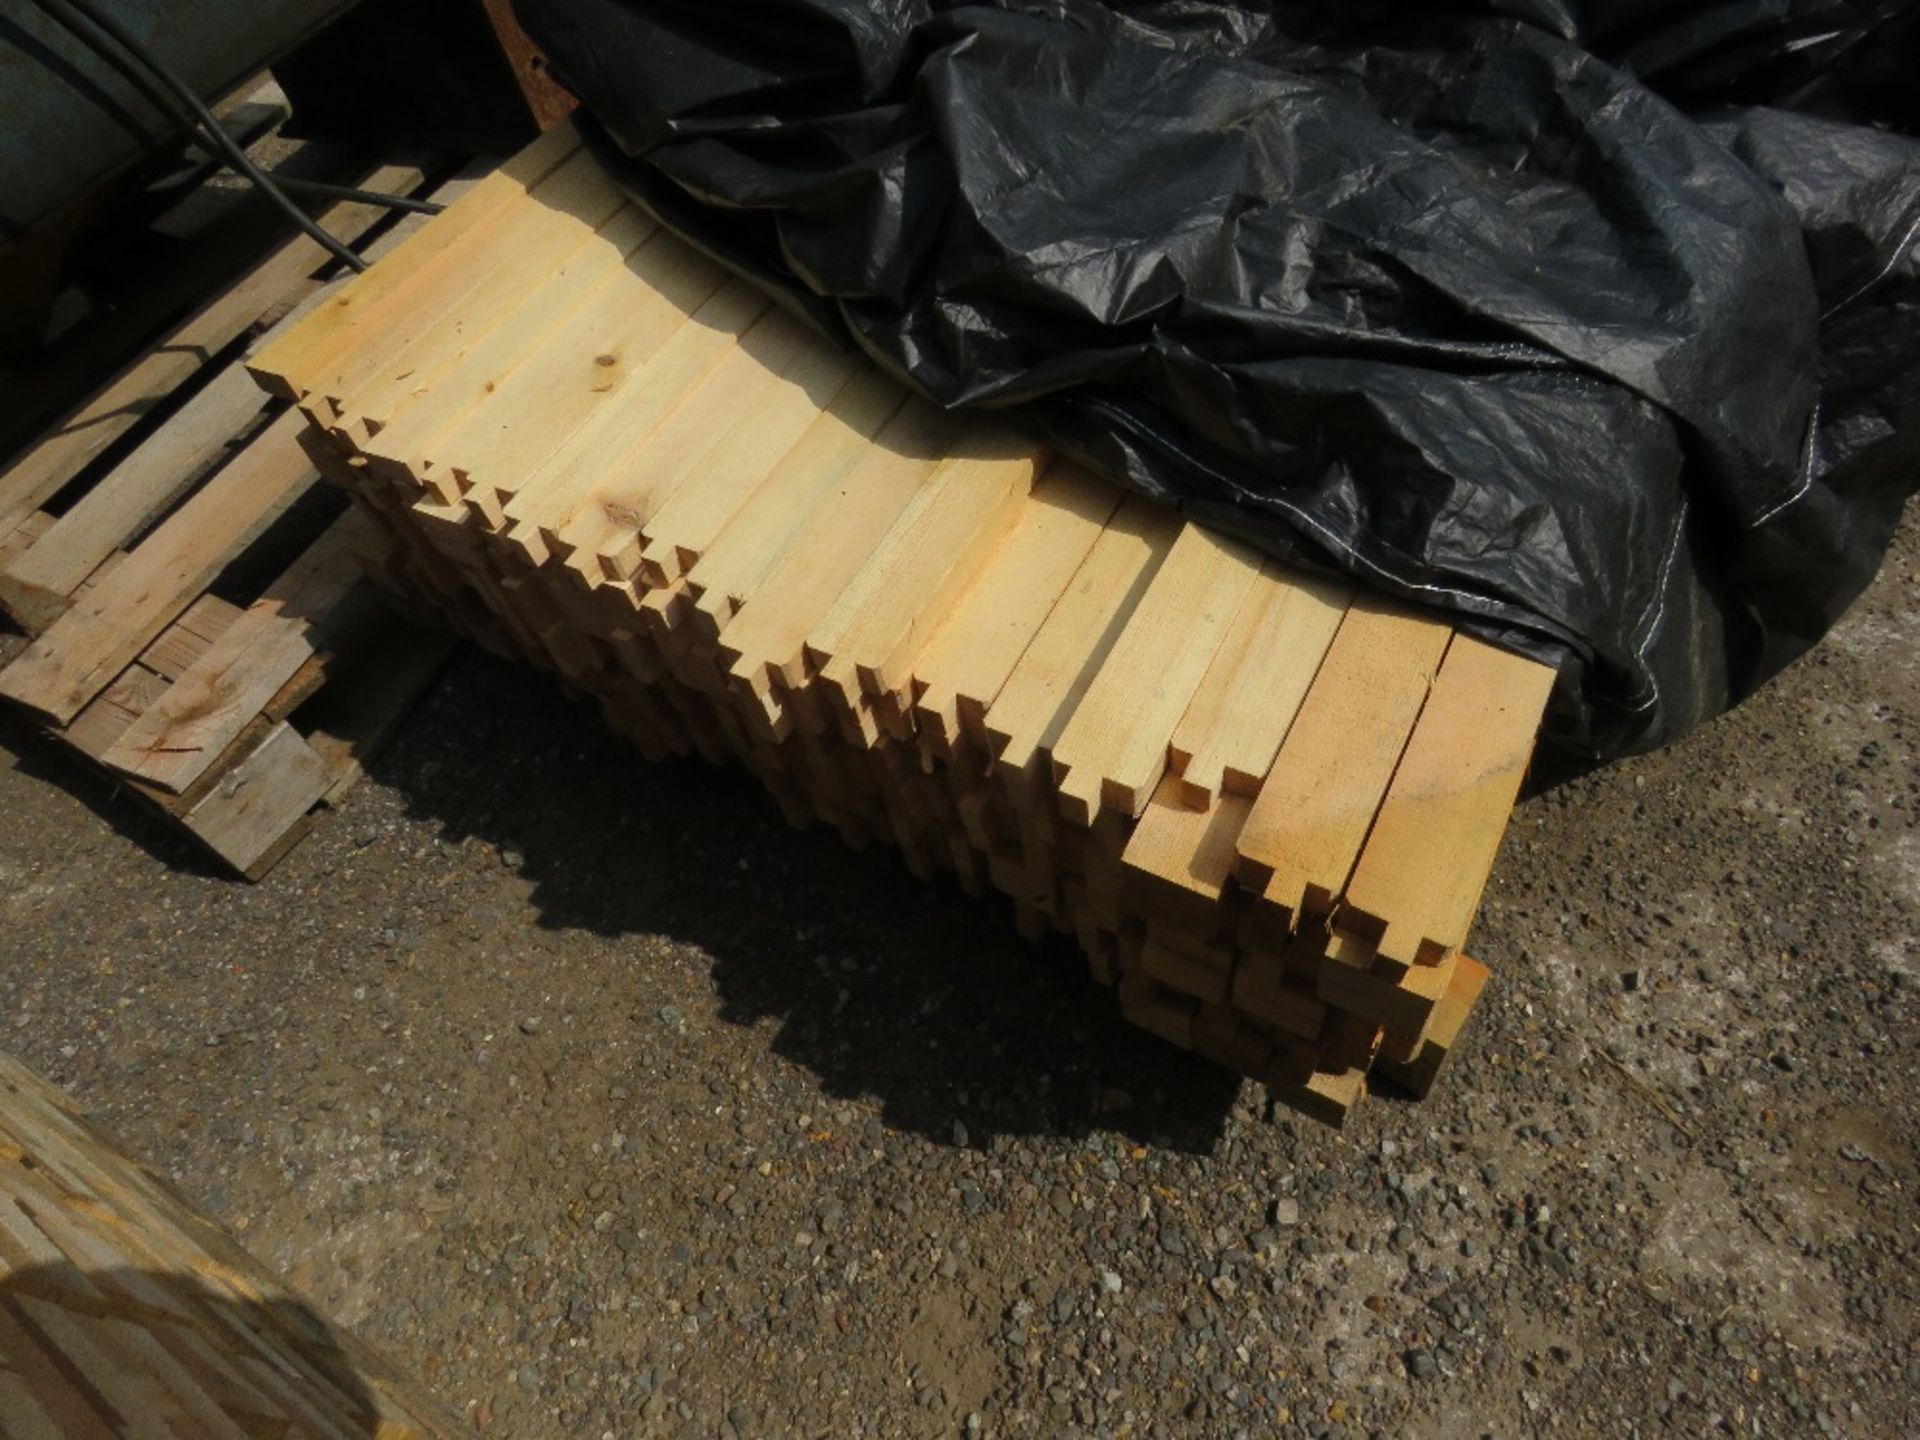 UNTREATED SAWN TIMBER SLATS 50MM X 25MM @1.74M LENGTH APPROX. - Image 3 of 3